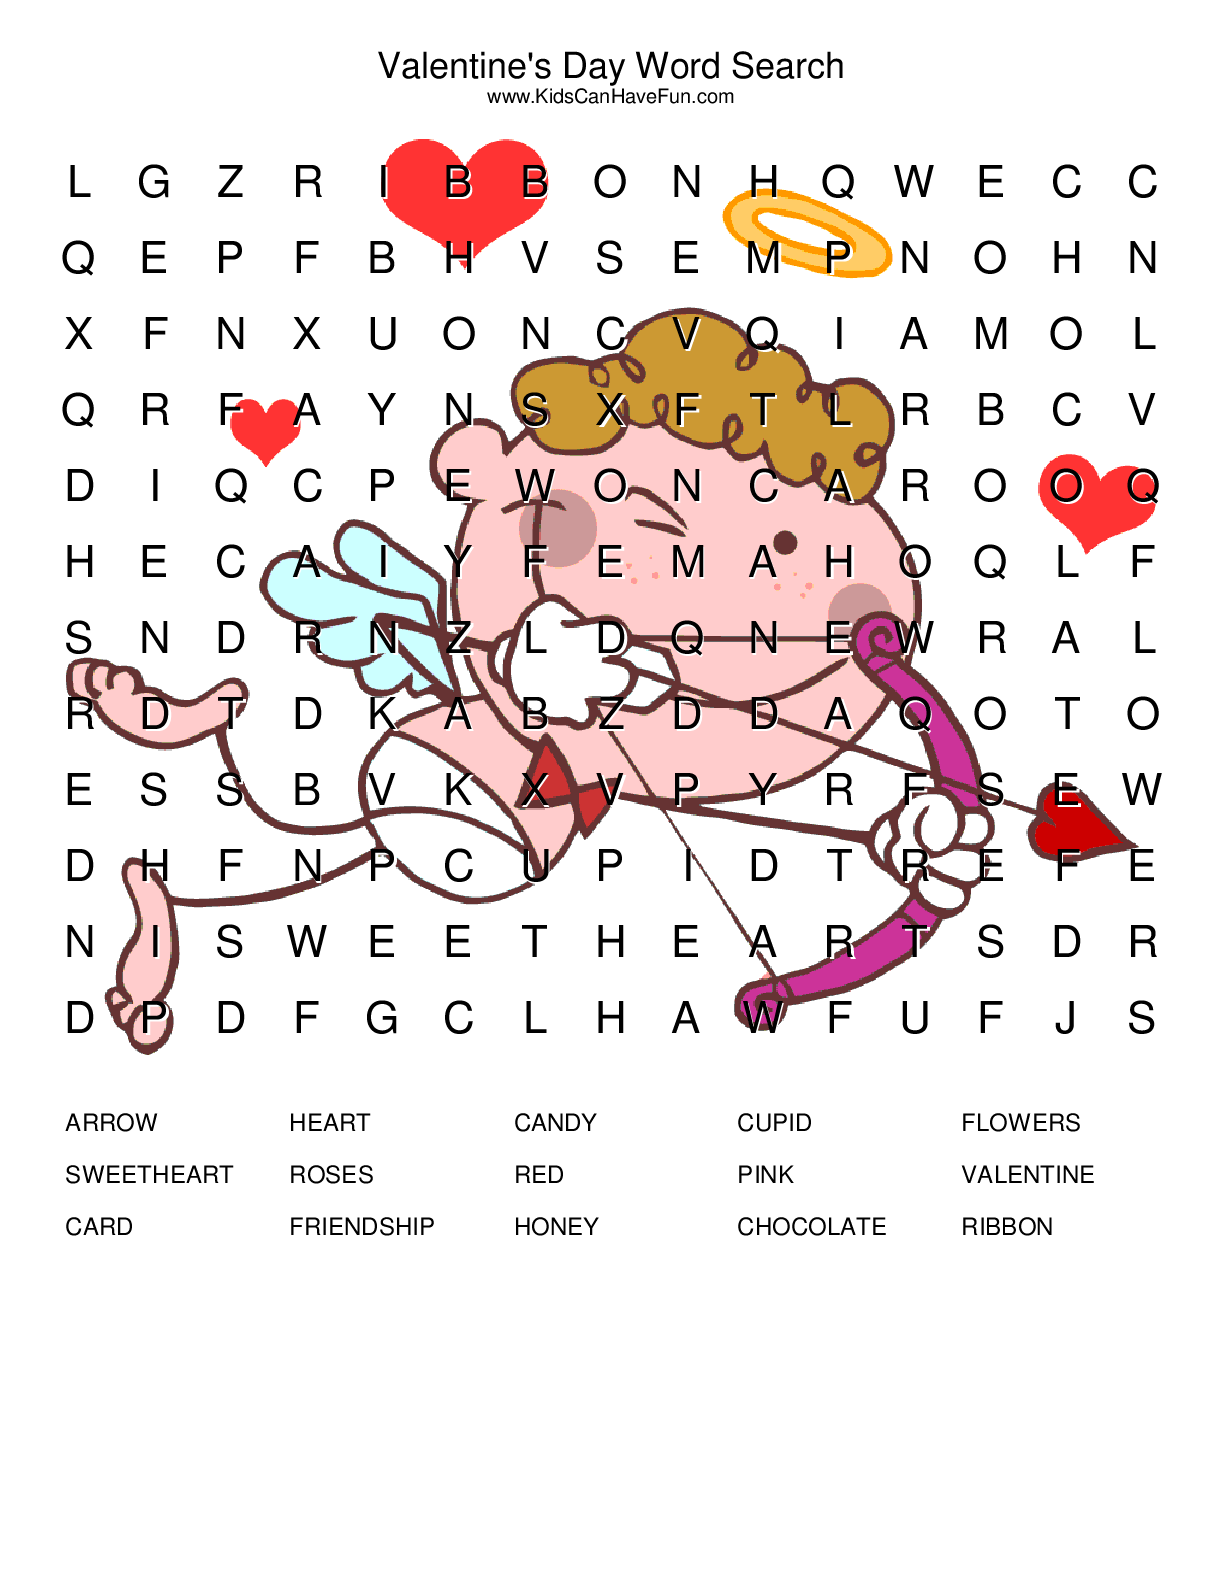 List Valentine's Day Words For Word Search, Cross Word, Word Jumble Game Maker1224 x 1584